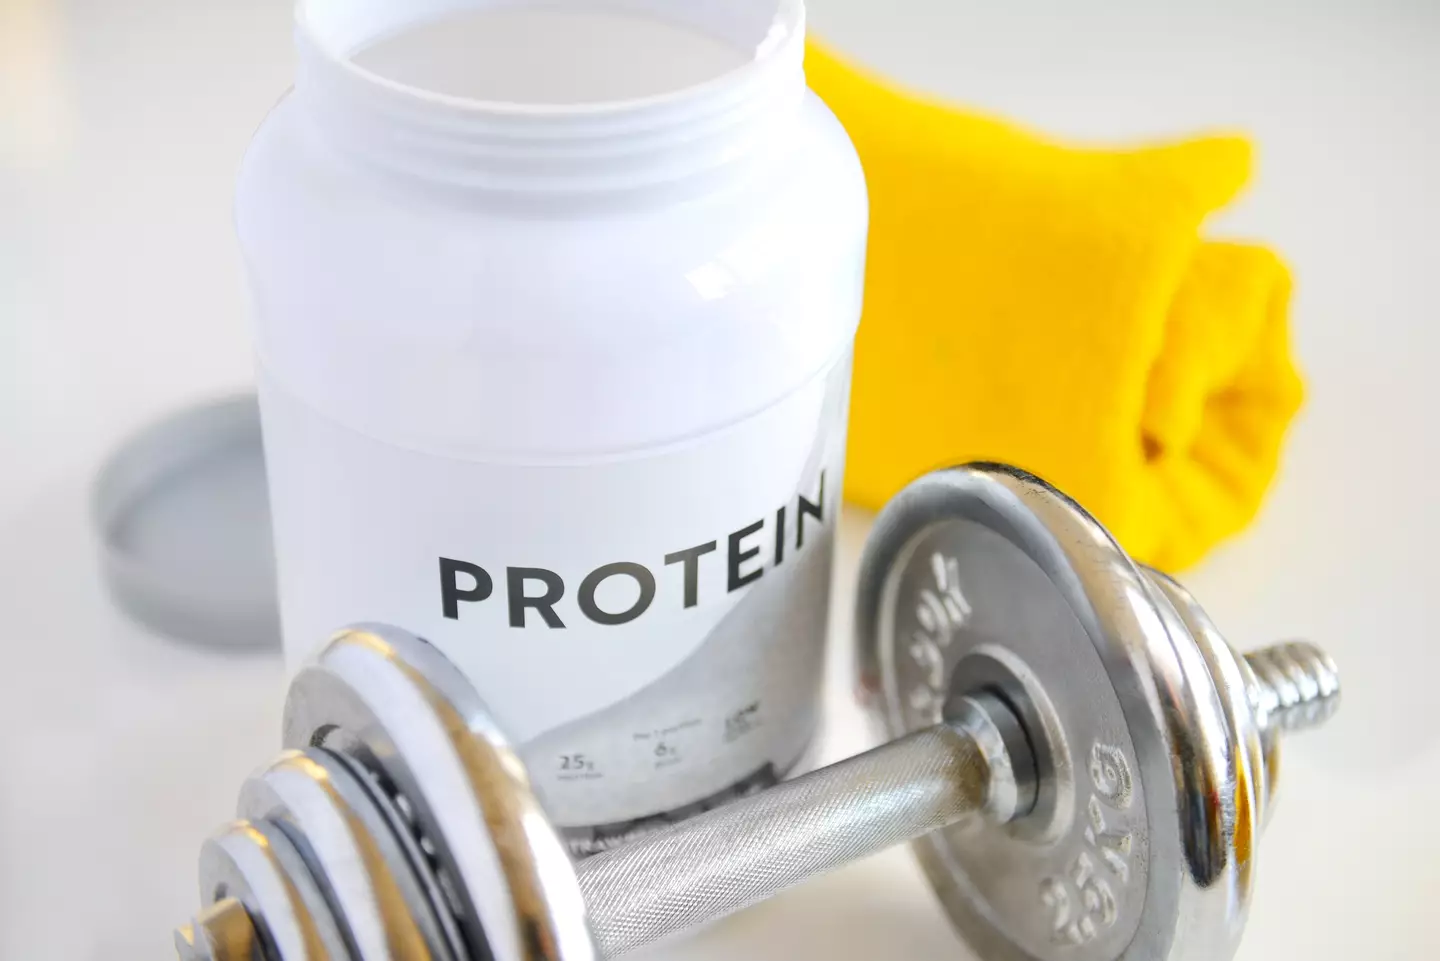 Protein shakes are typically consumed by people wanting to gain muscle mass.